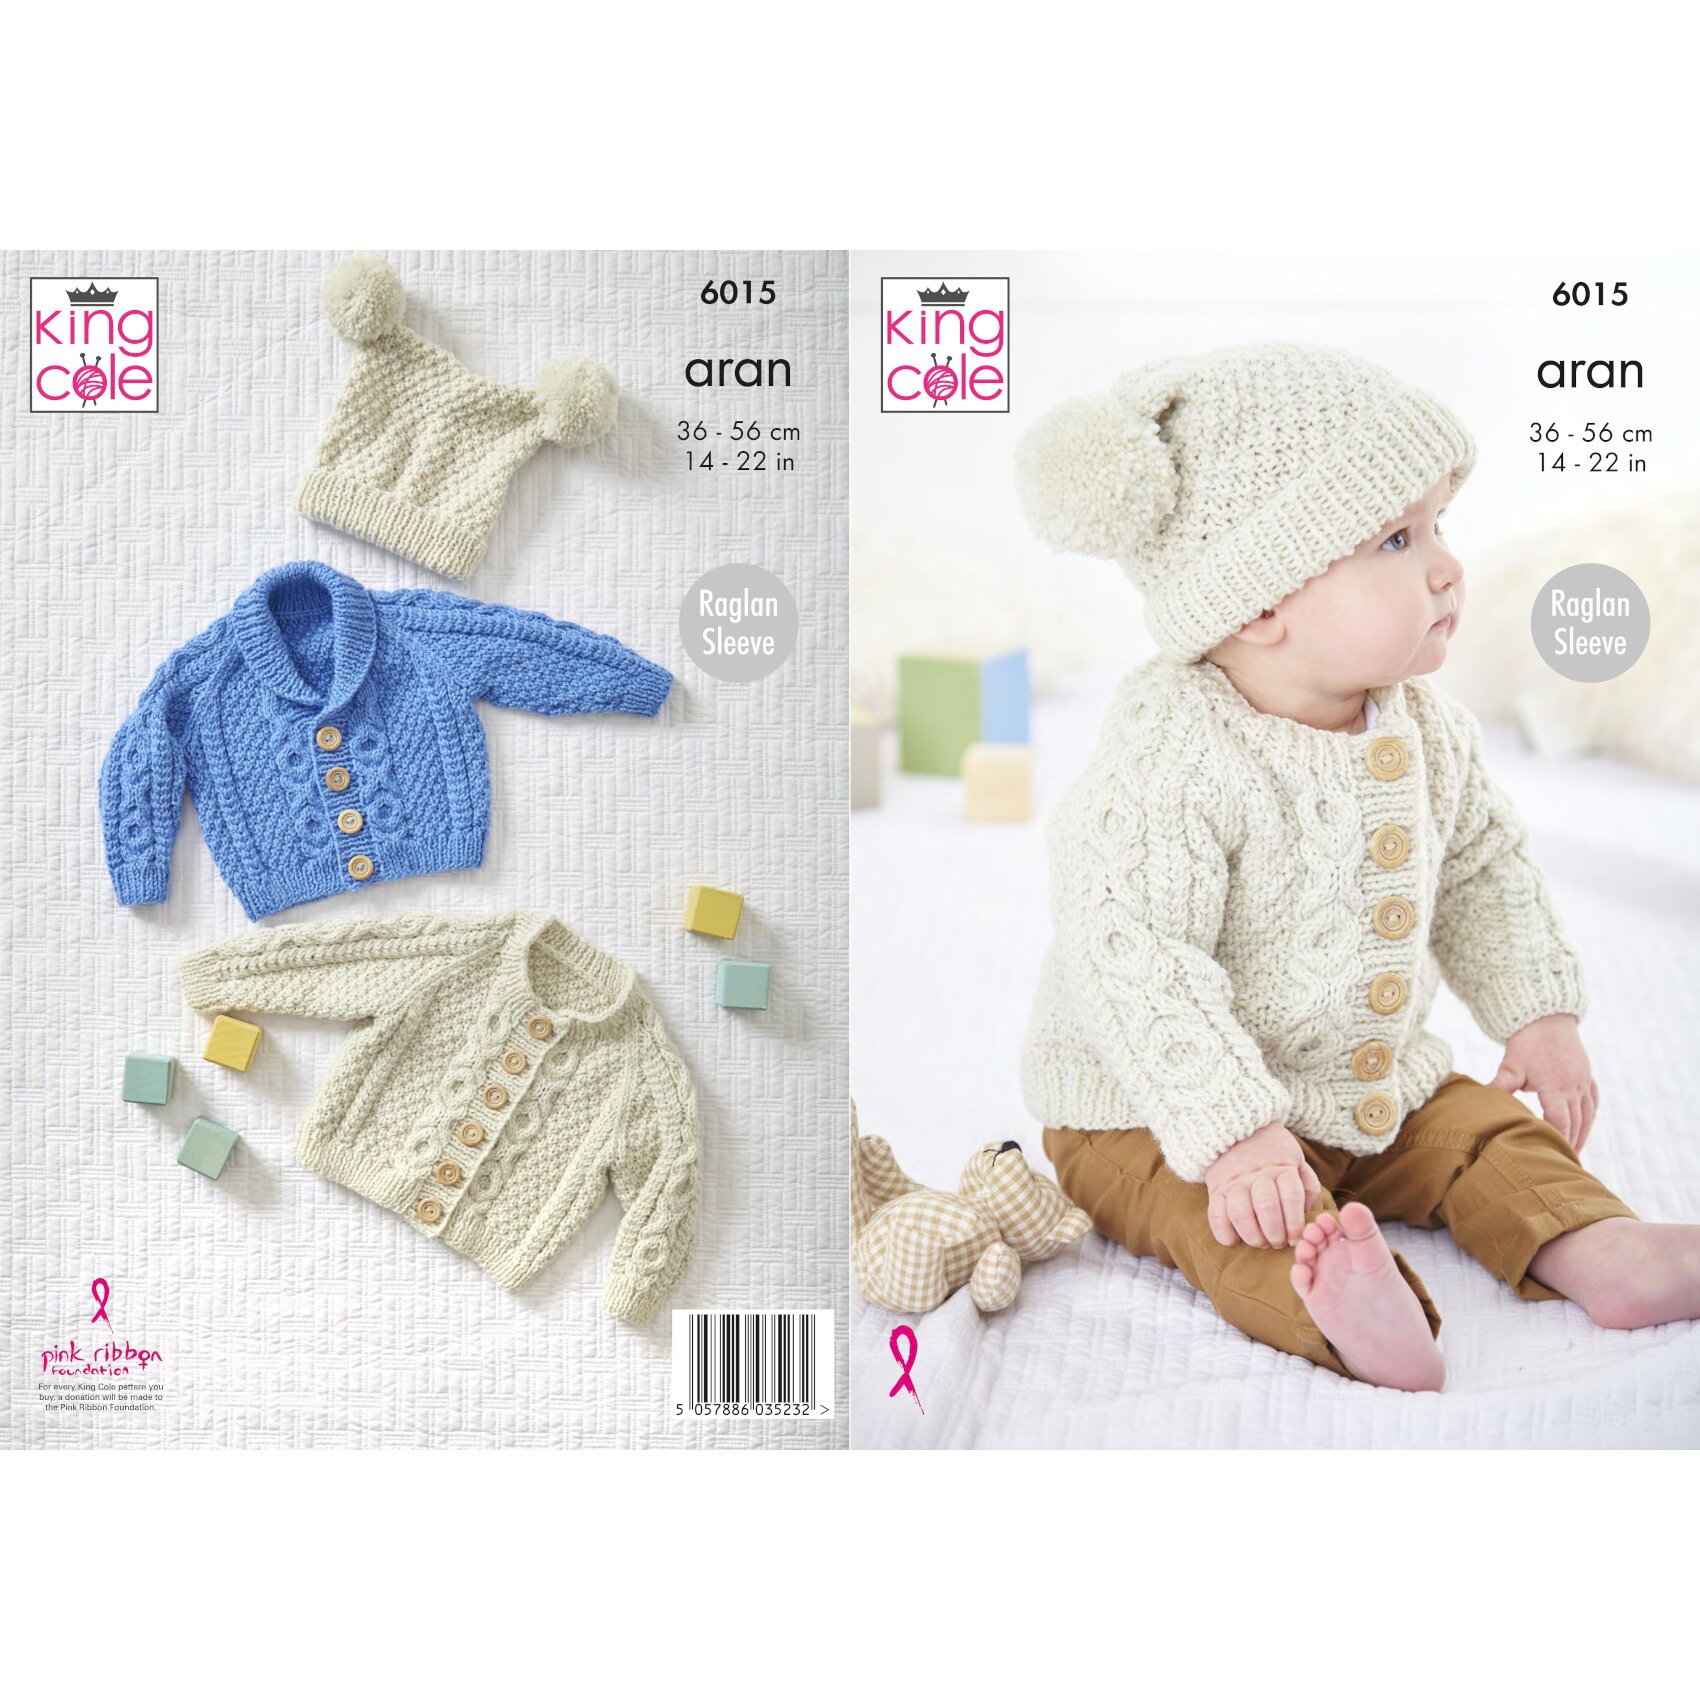 King Cole 6015 Aran Knitting Pattern Baby Cable Knit Cardigan & Hat